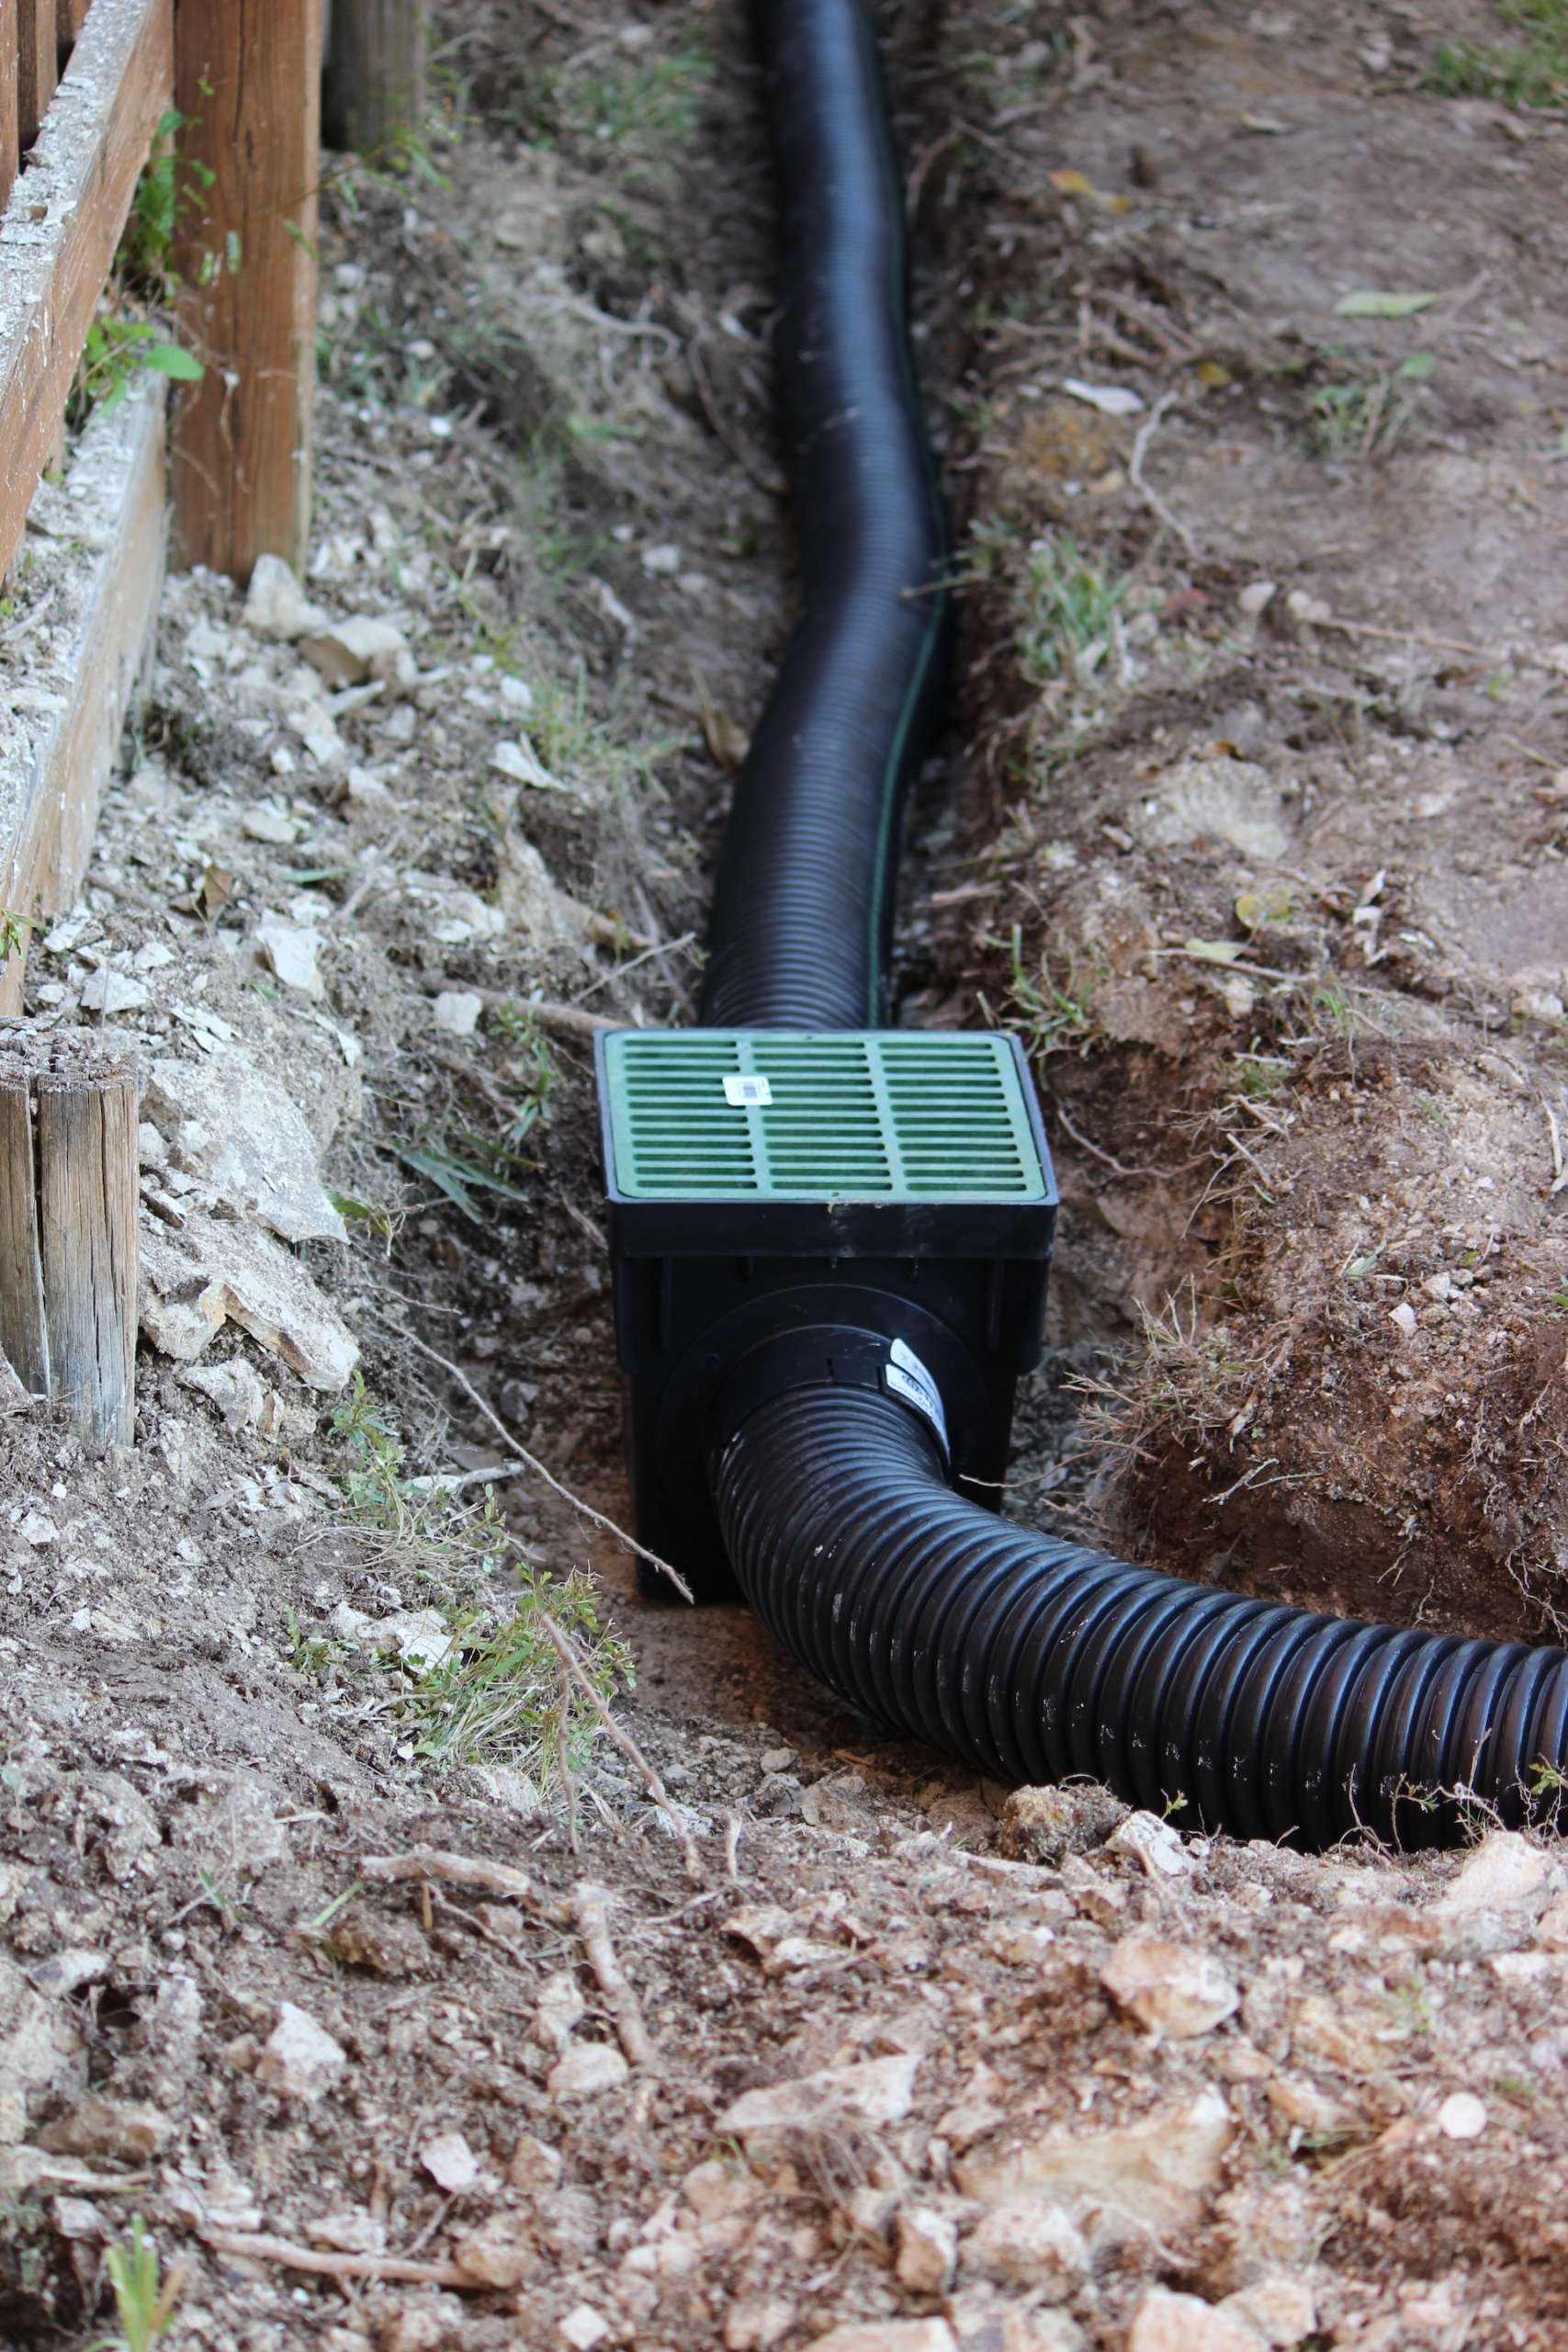 Rain Drain installation and cleaning in Portland